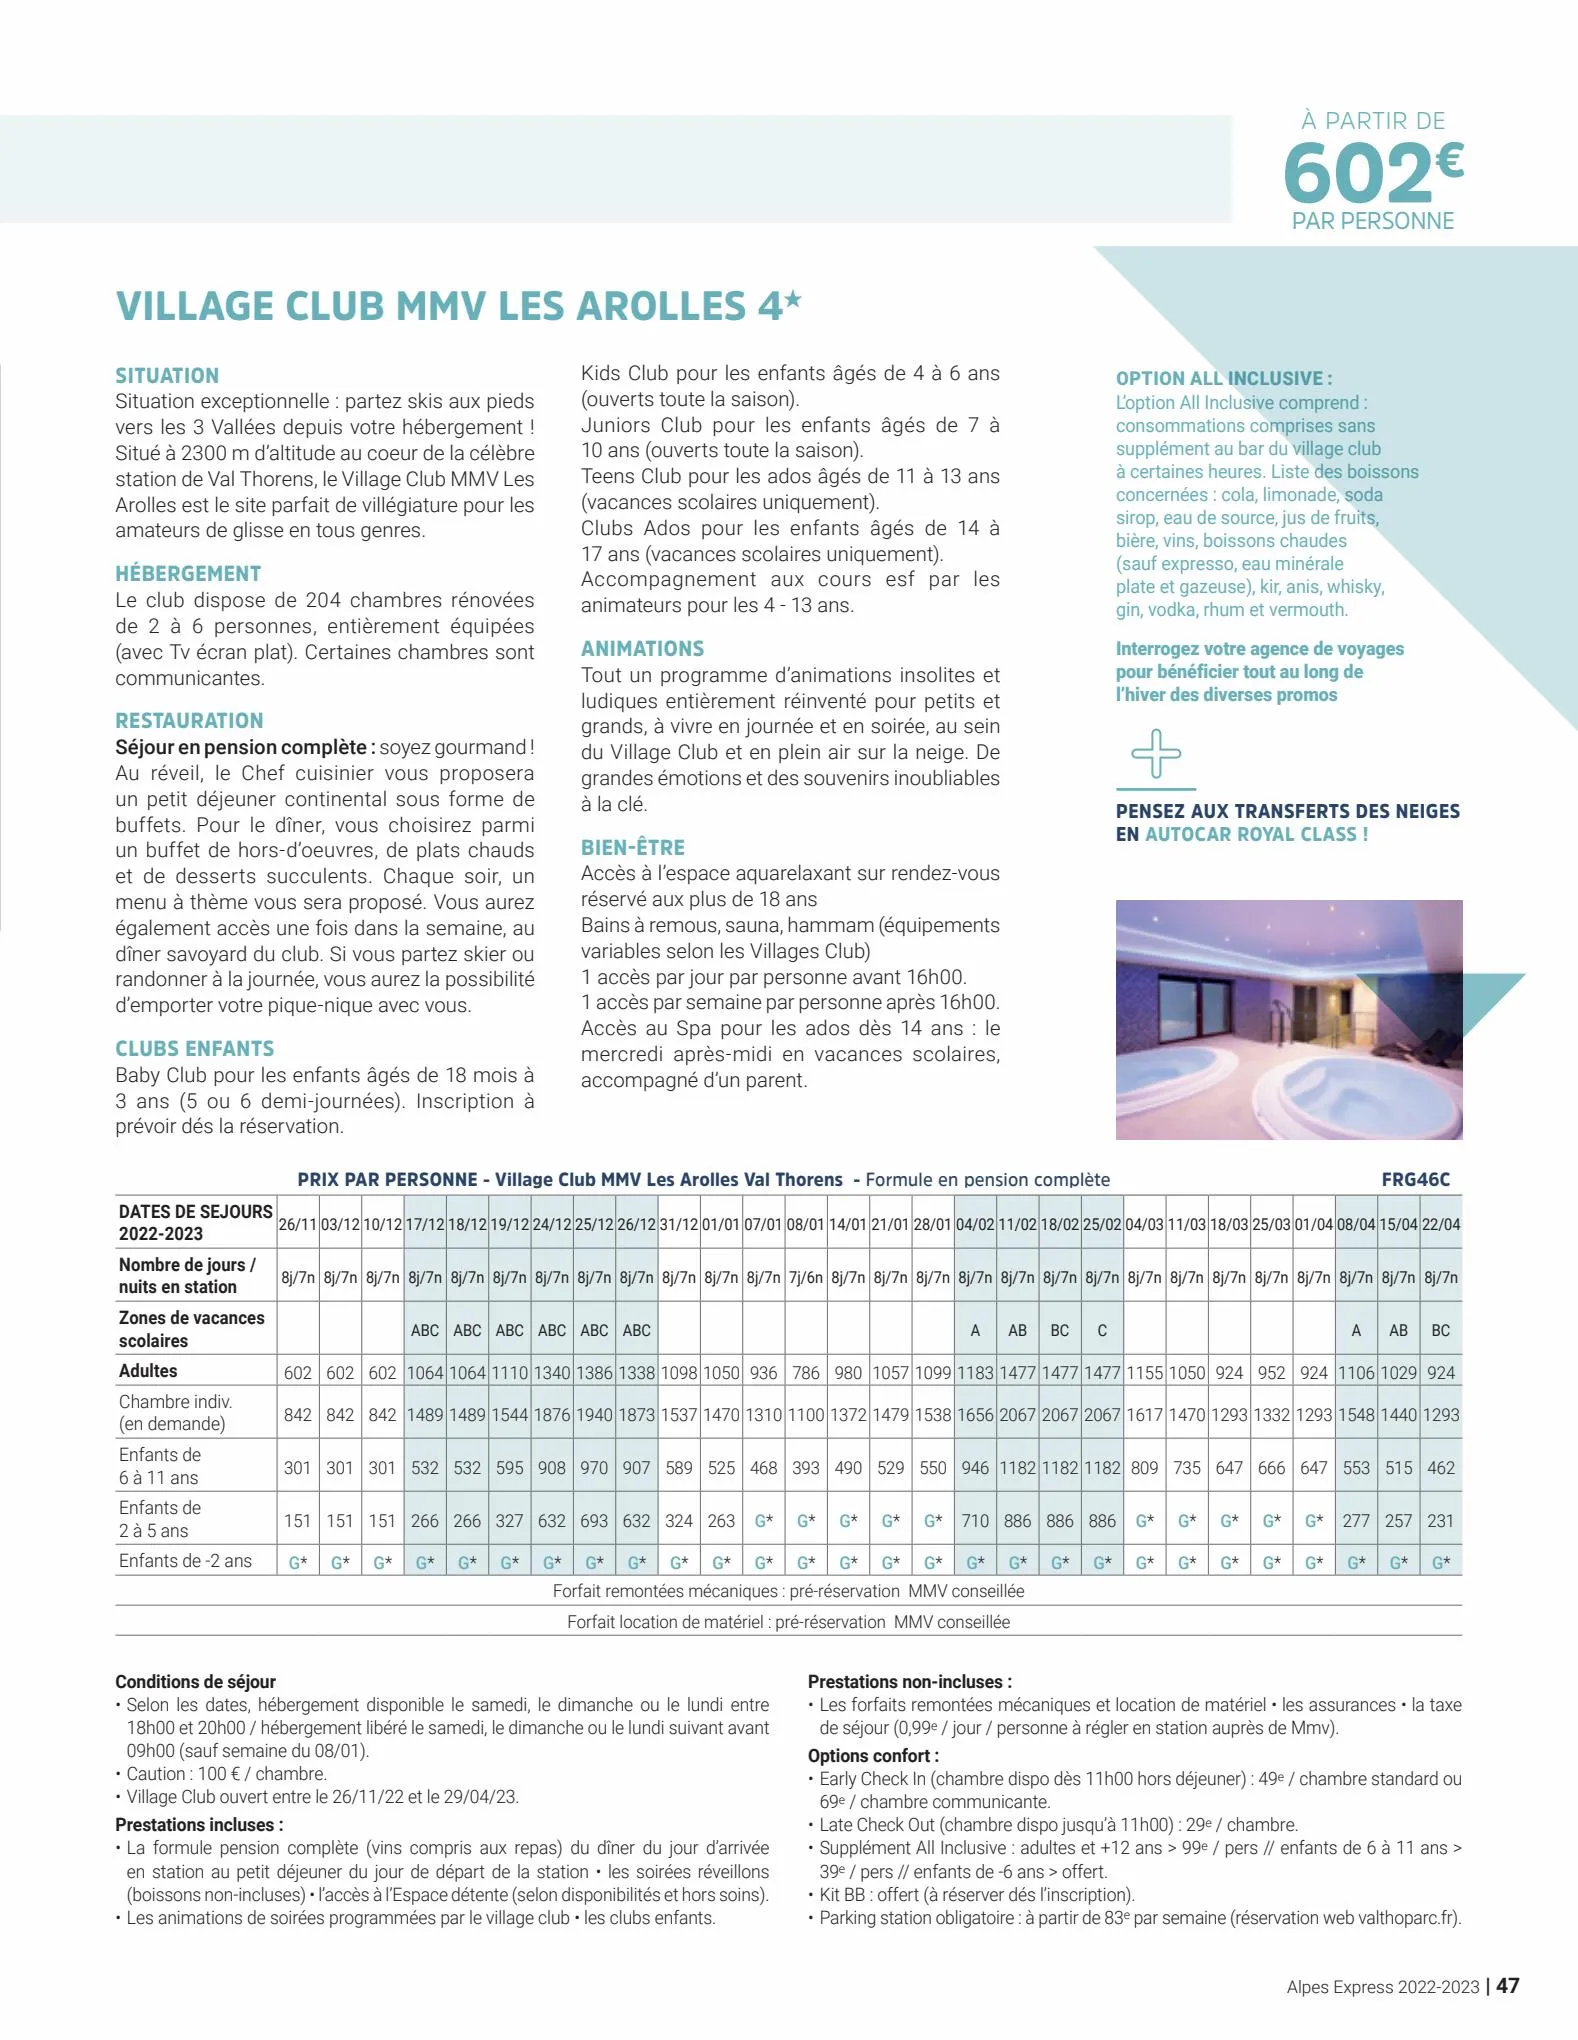 Catalogue Alpes Express - Hiver 2022-2023, page 00047